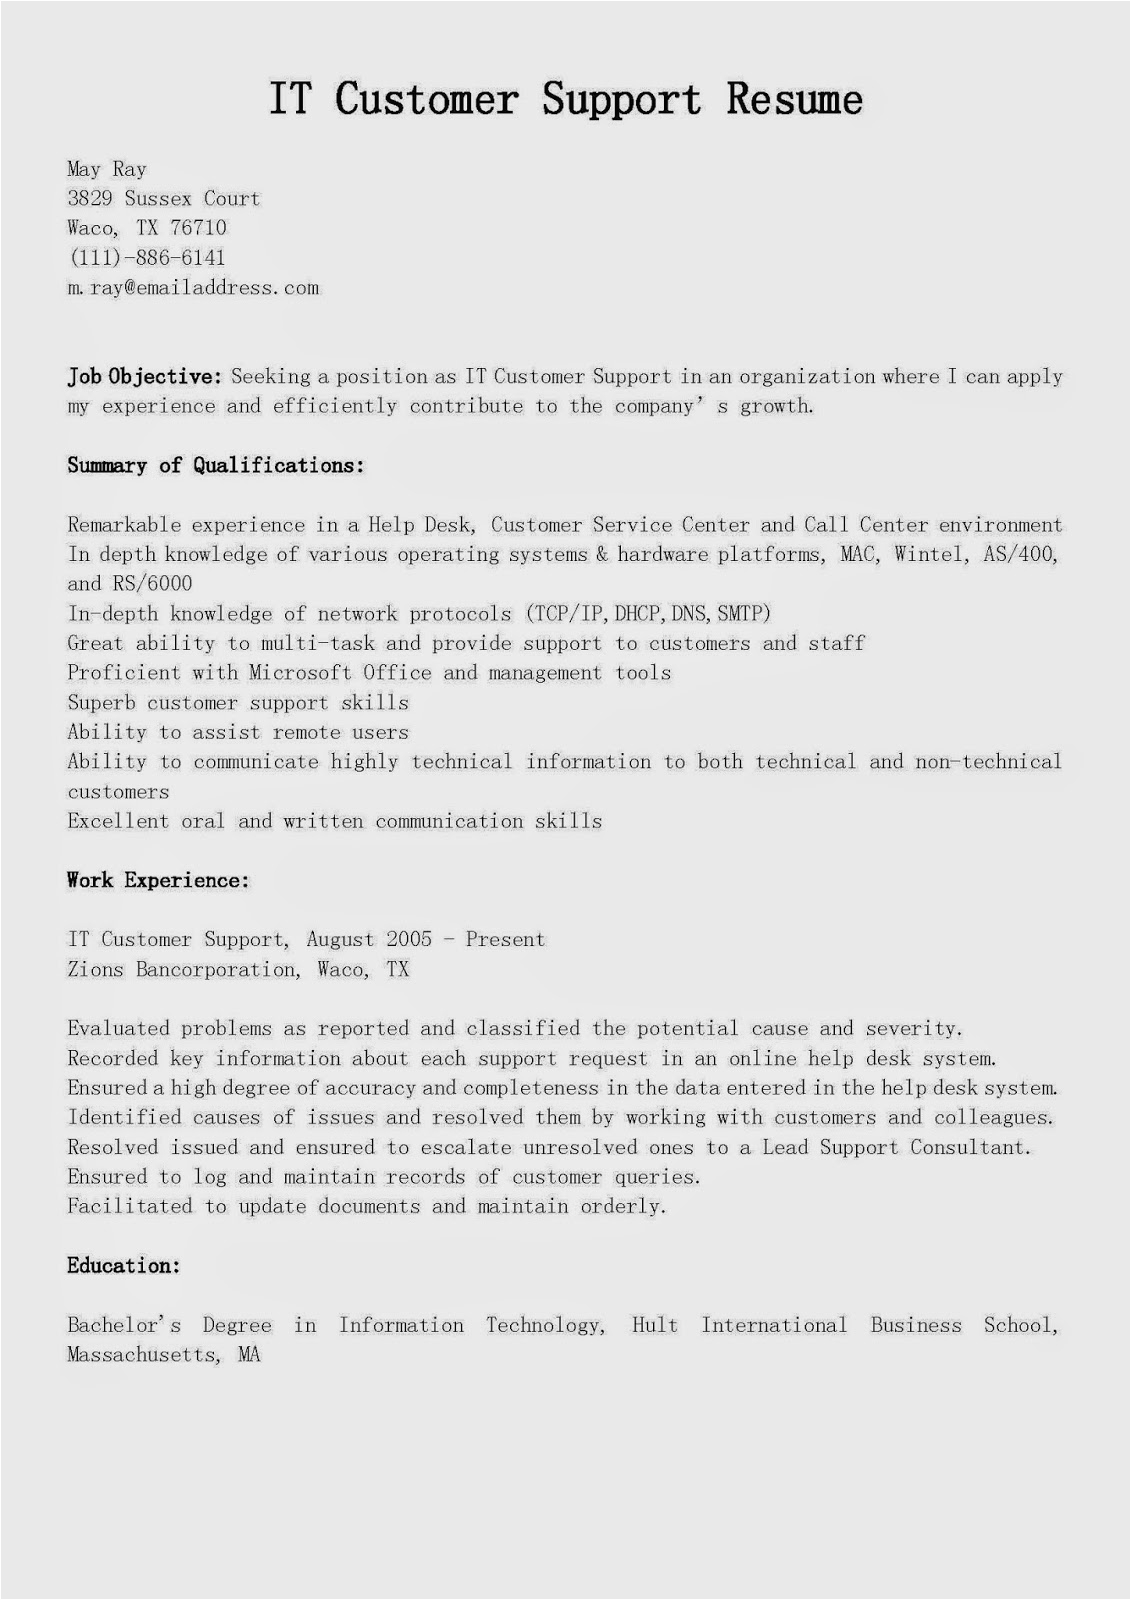 Customer Service Technical Support Sample Resume Resume Samples It Customer Support Resume Sample